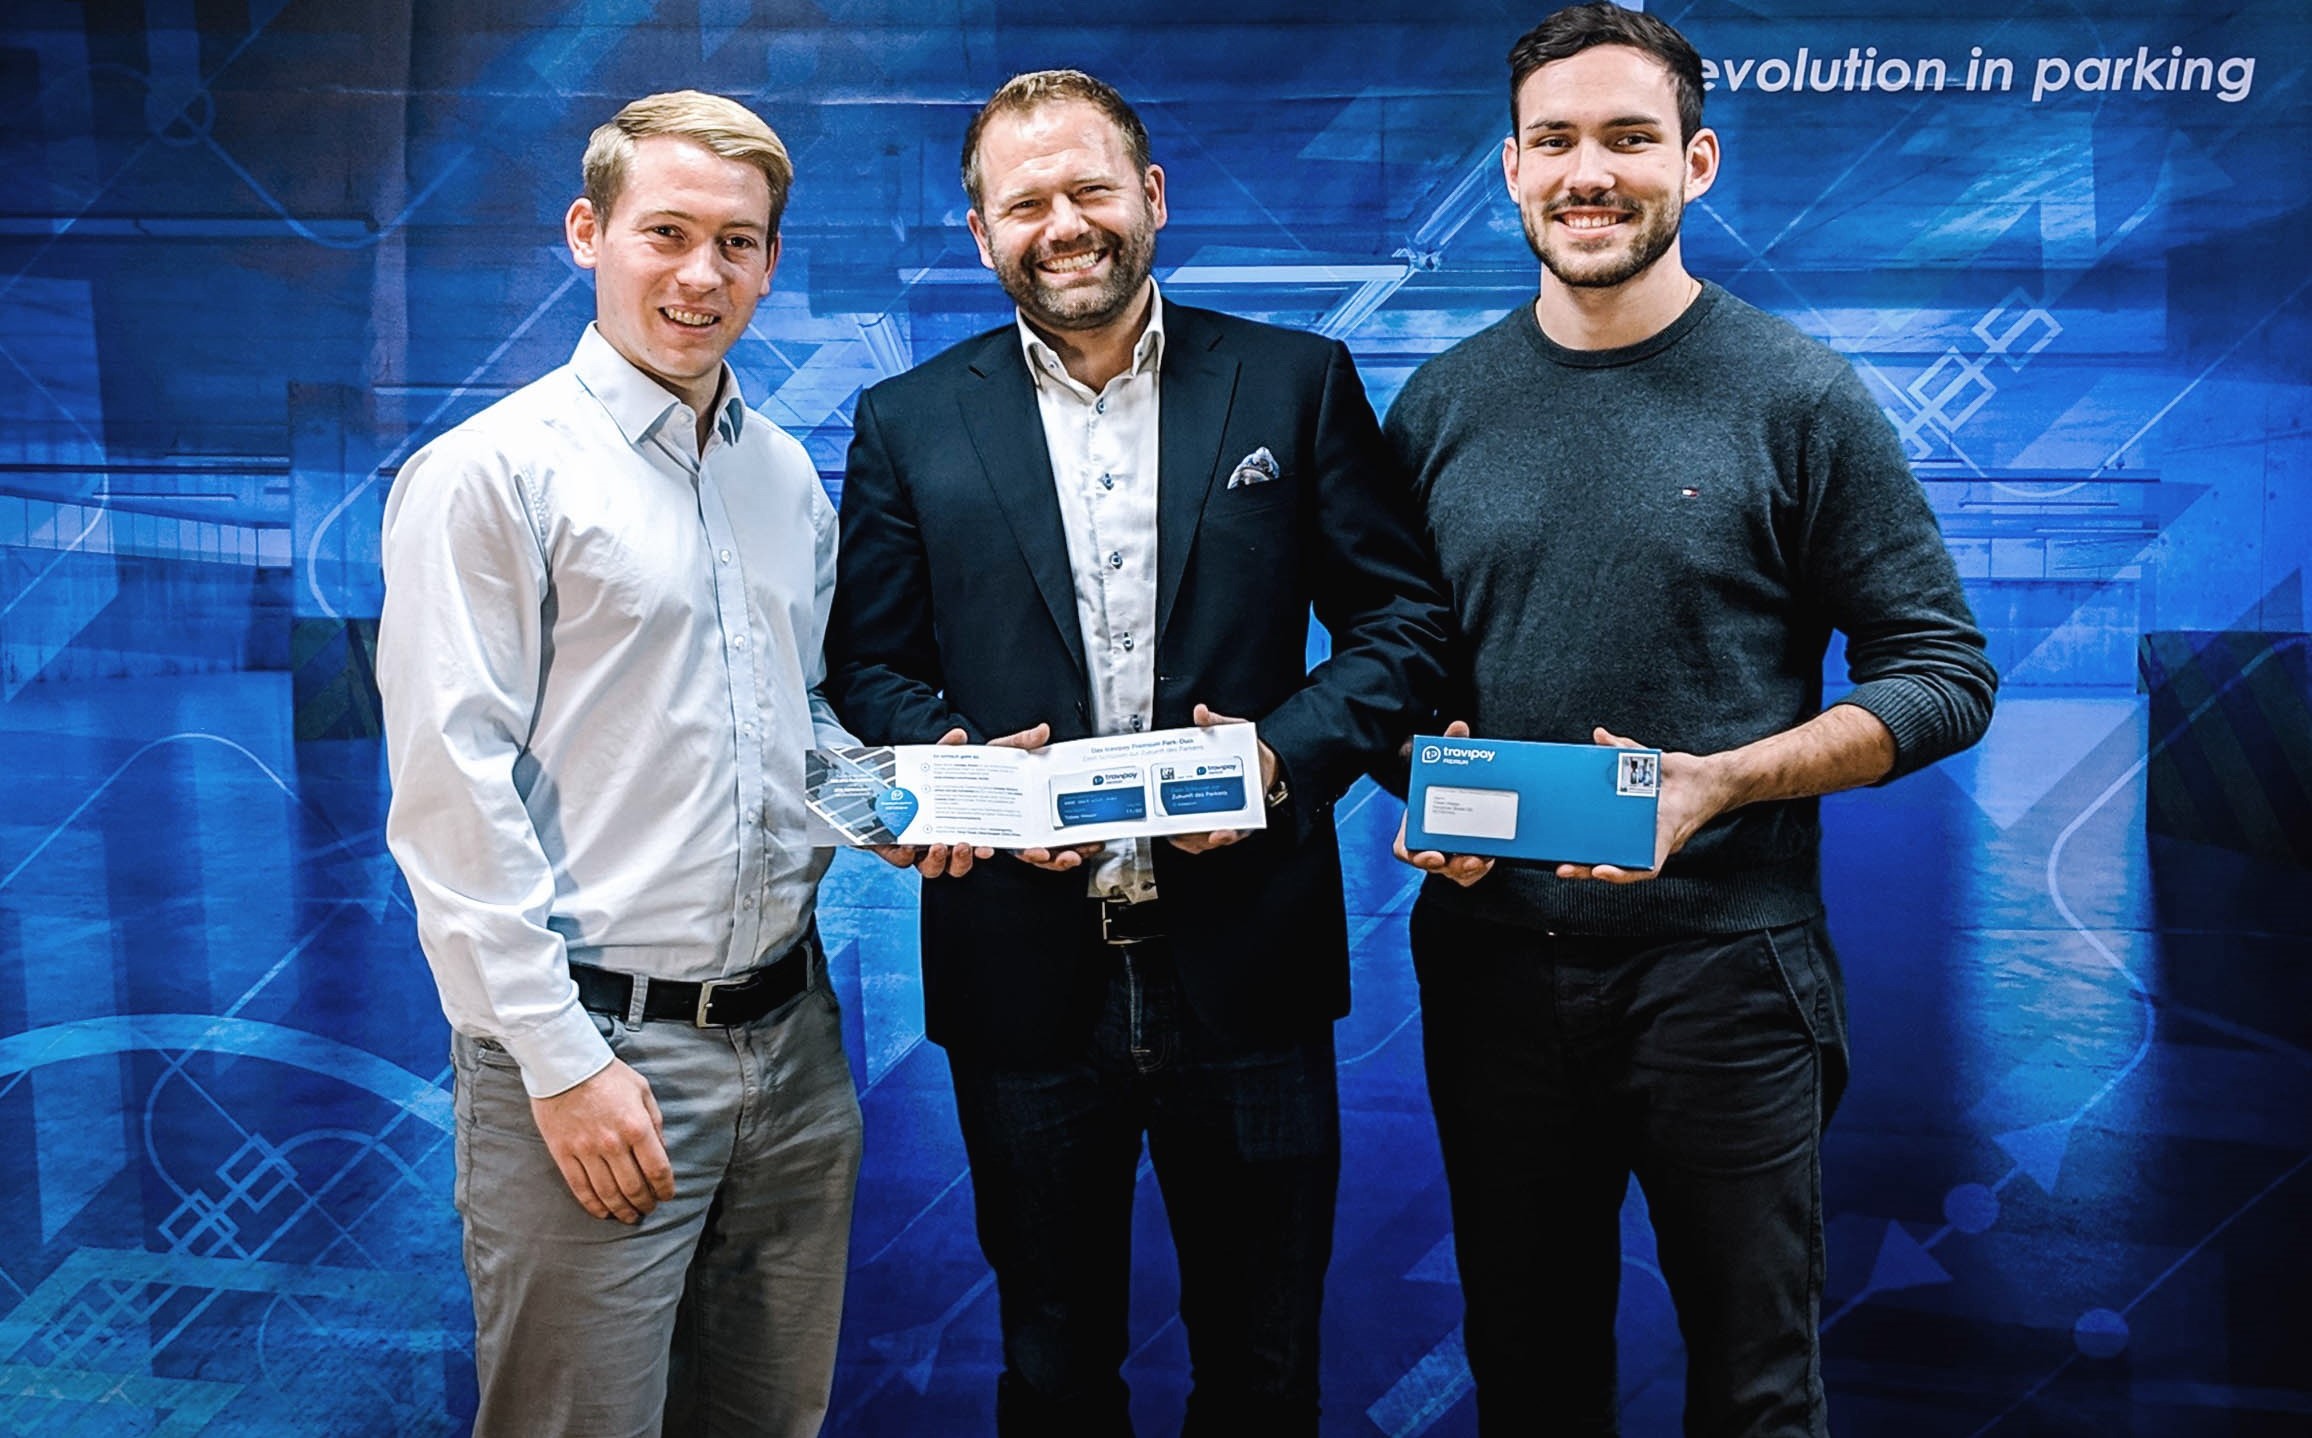 evopark and sunhill technologies Start Cooperation (Picture left to right: Tobias Weiper, Matthias Mandelkow, Philipp Schnorbach)